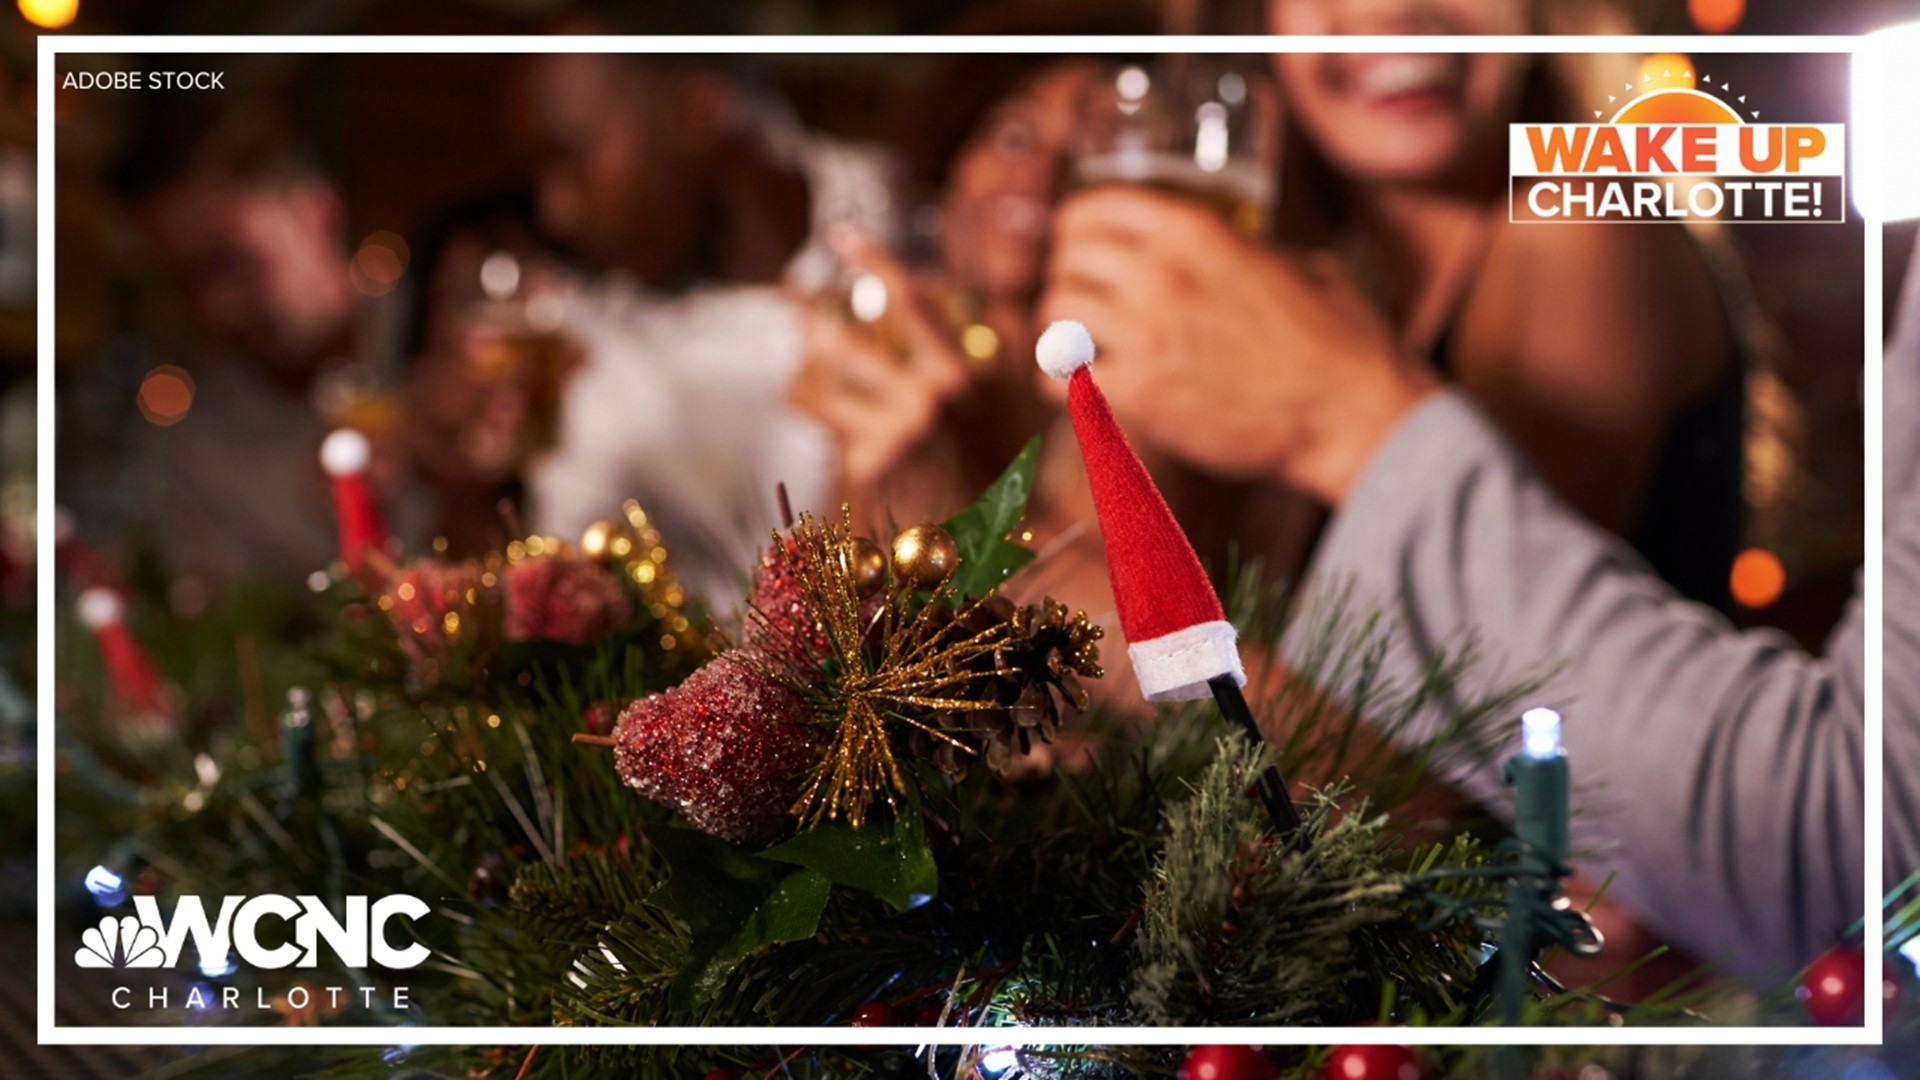 We're discussing what one report called the worst things to do at a holiday party. What would you add to the list?